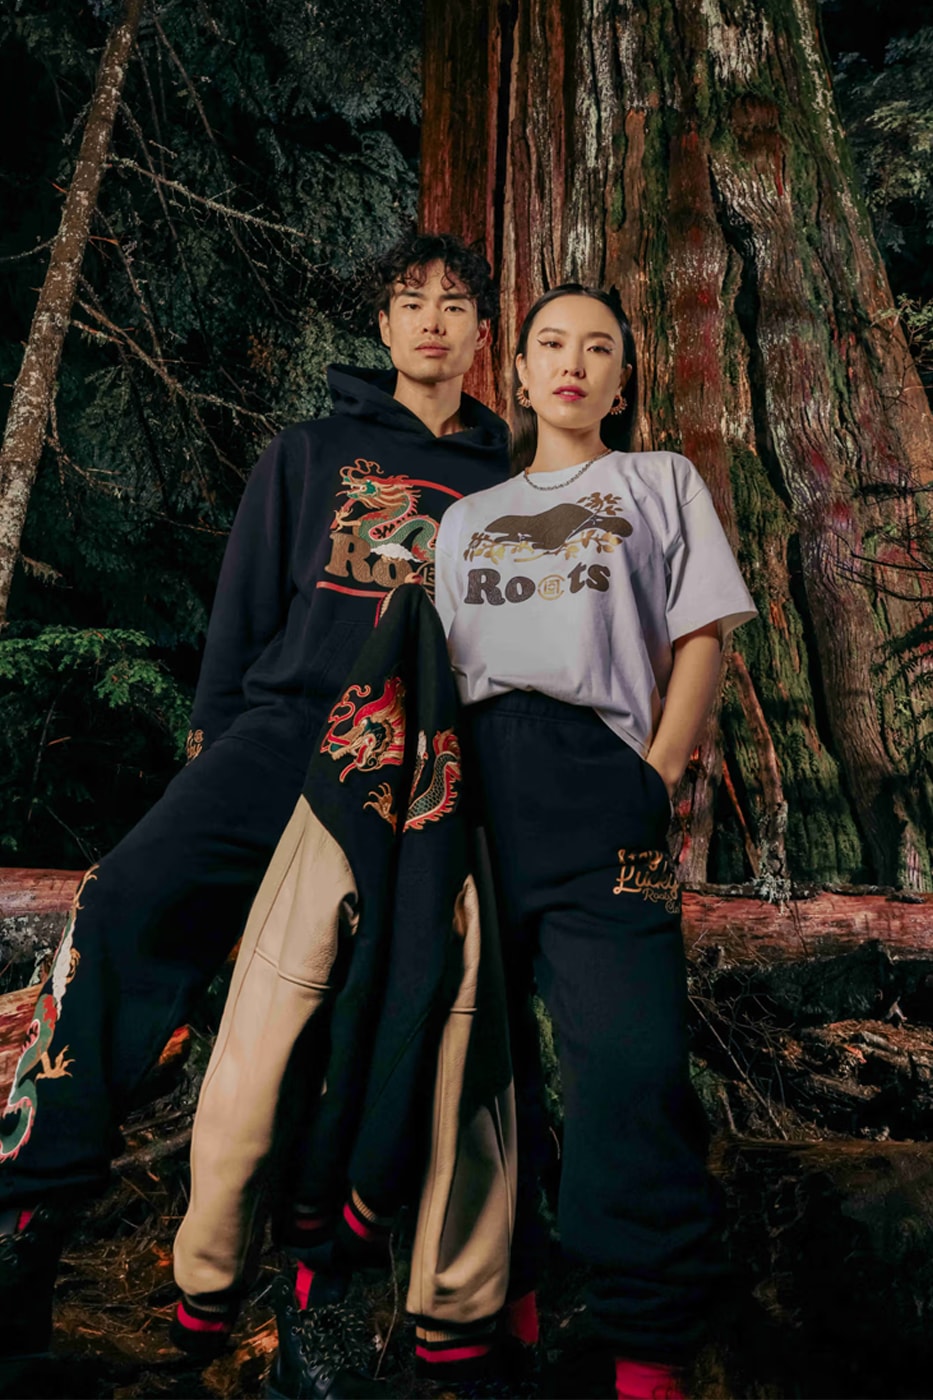 CLOT x Roots "Stay Lucky" Year of the Dragon Lunar New Year Capsule Collaboration Release Info